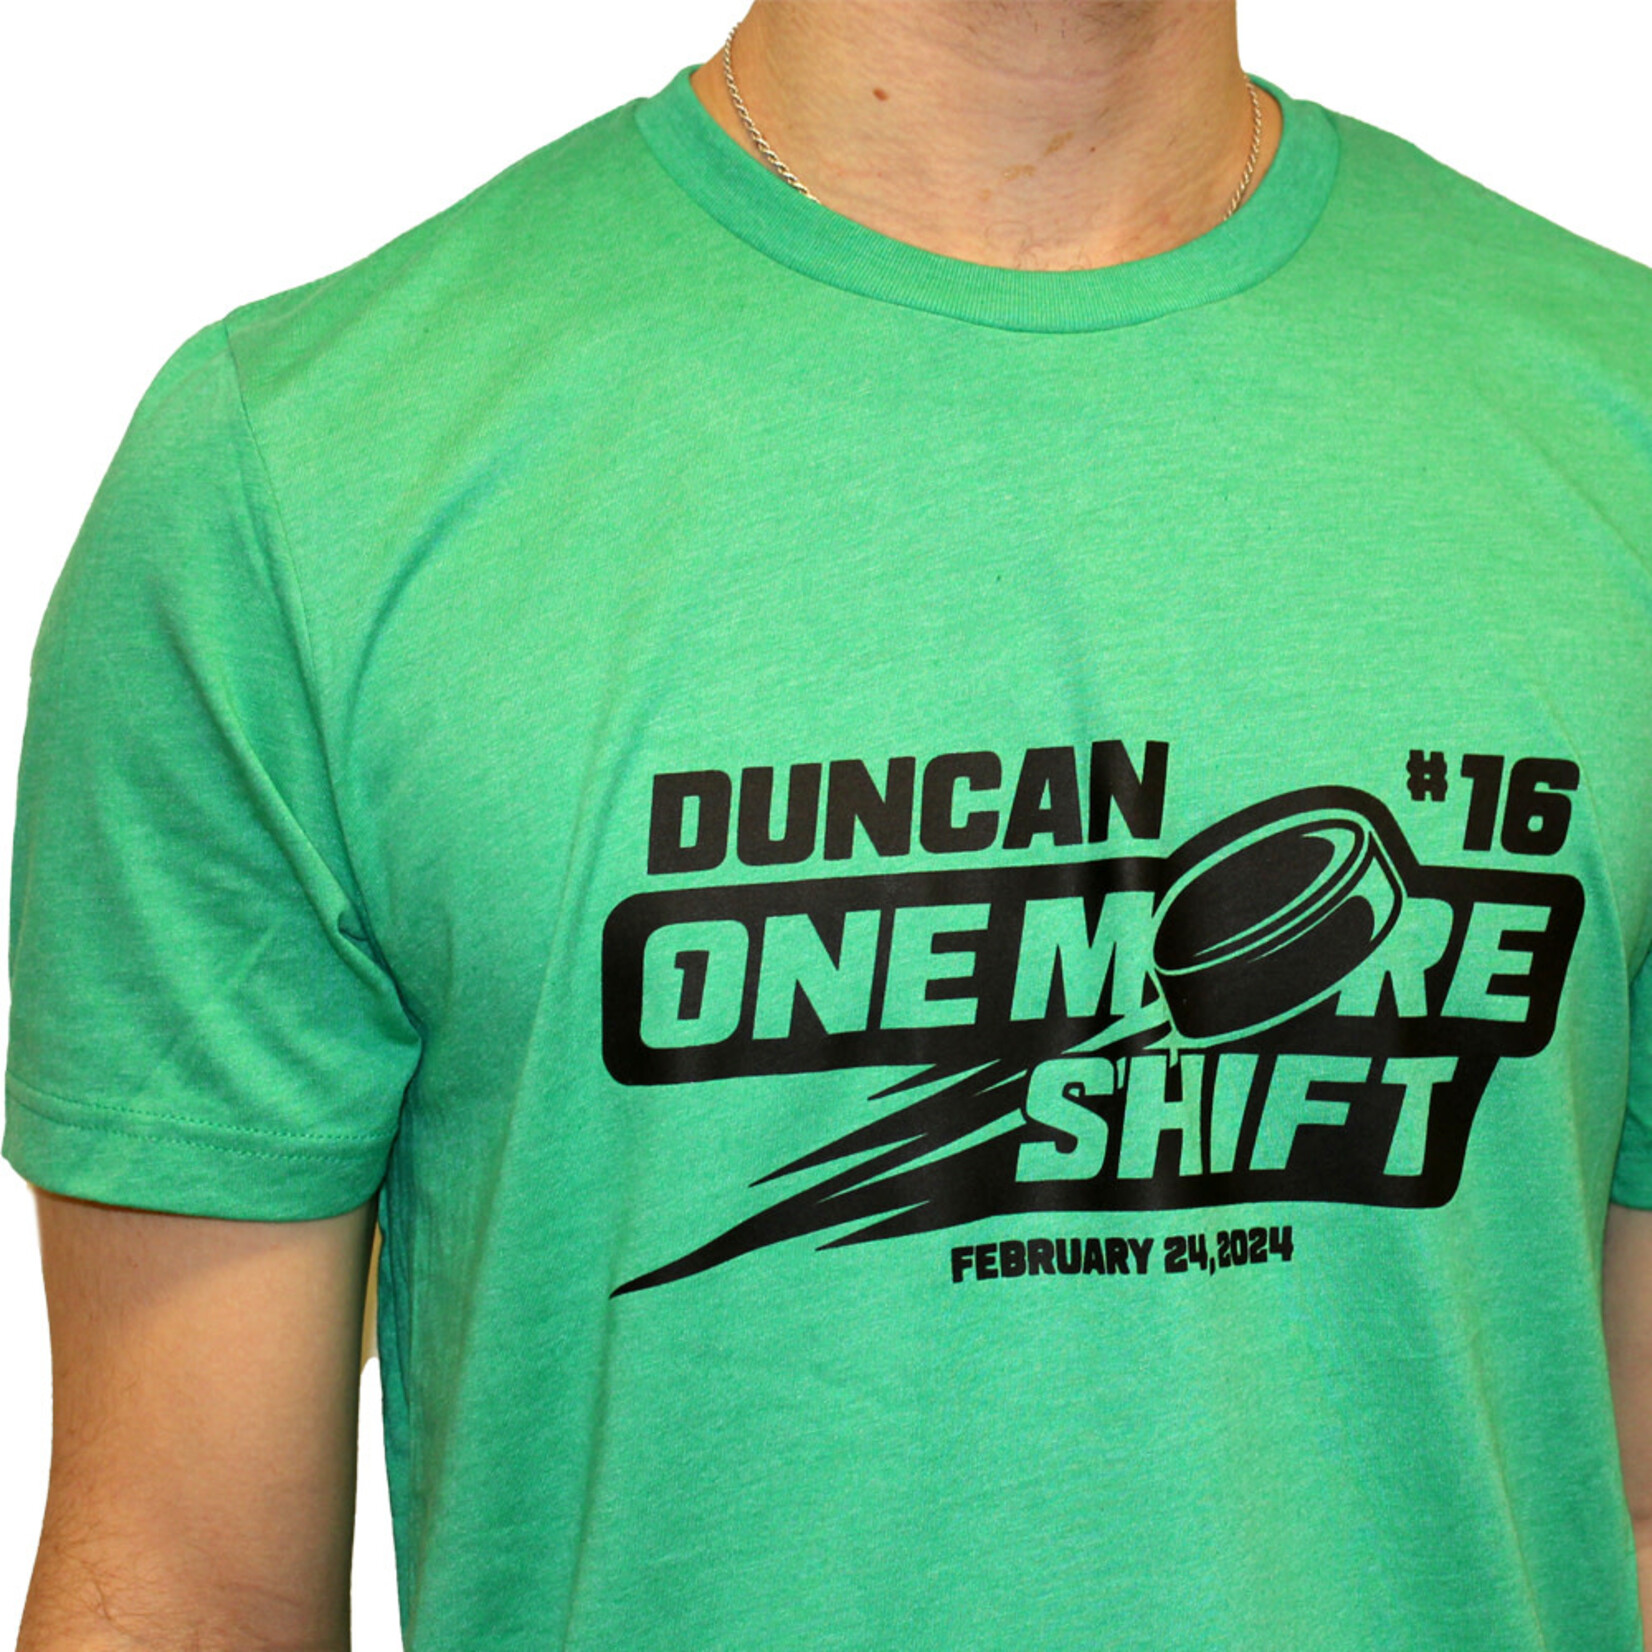 AHUNDYP One More Shift Tee - Duncan